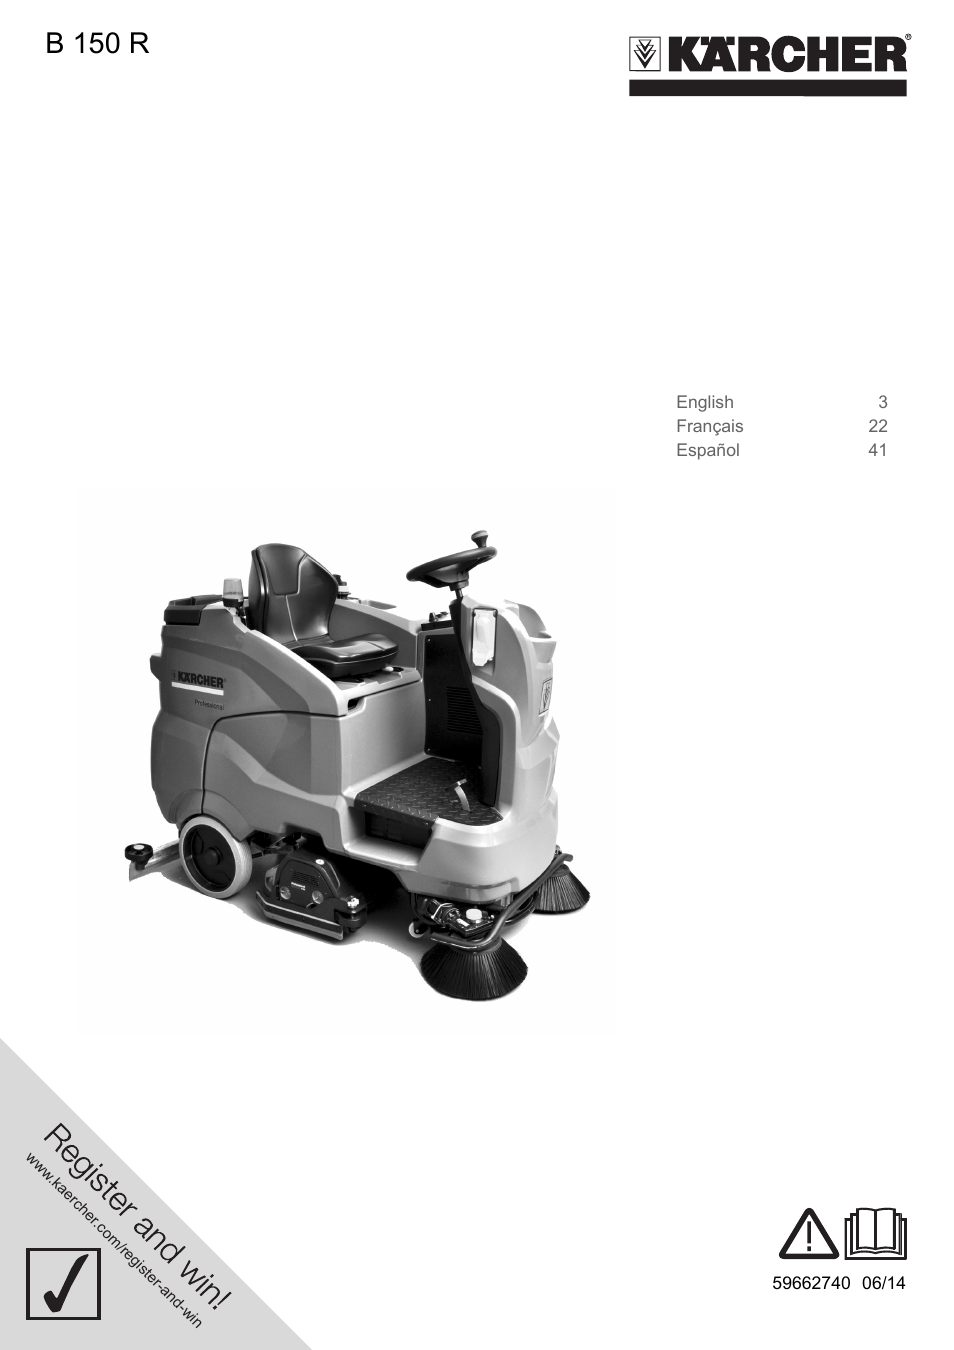 Karcher B 150 R User Manual | 60 pages | Also for: Autolaveuse B 150 R  Advanced + R 75, Autolaveuse B 150 R + R 90, Autolaveuse B 150 R +